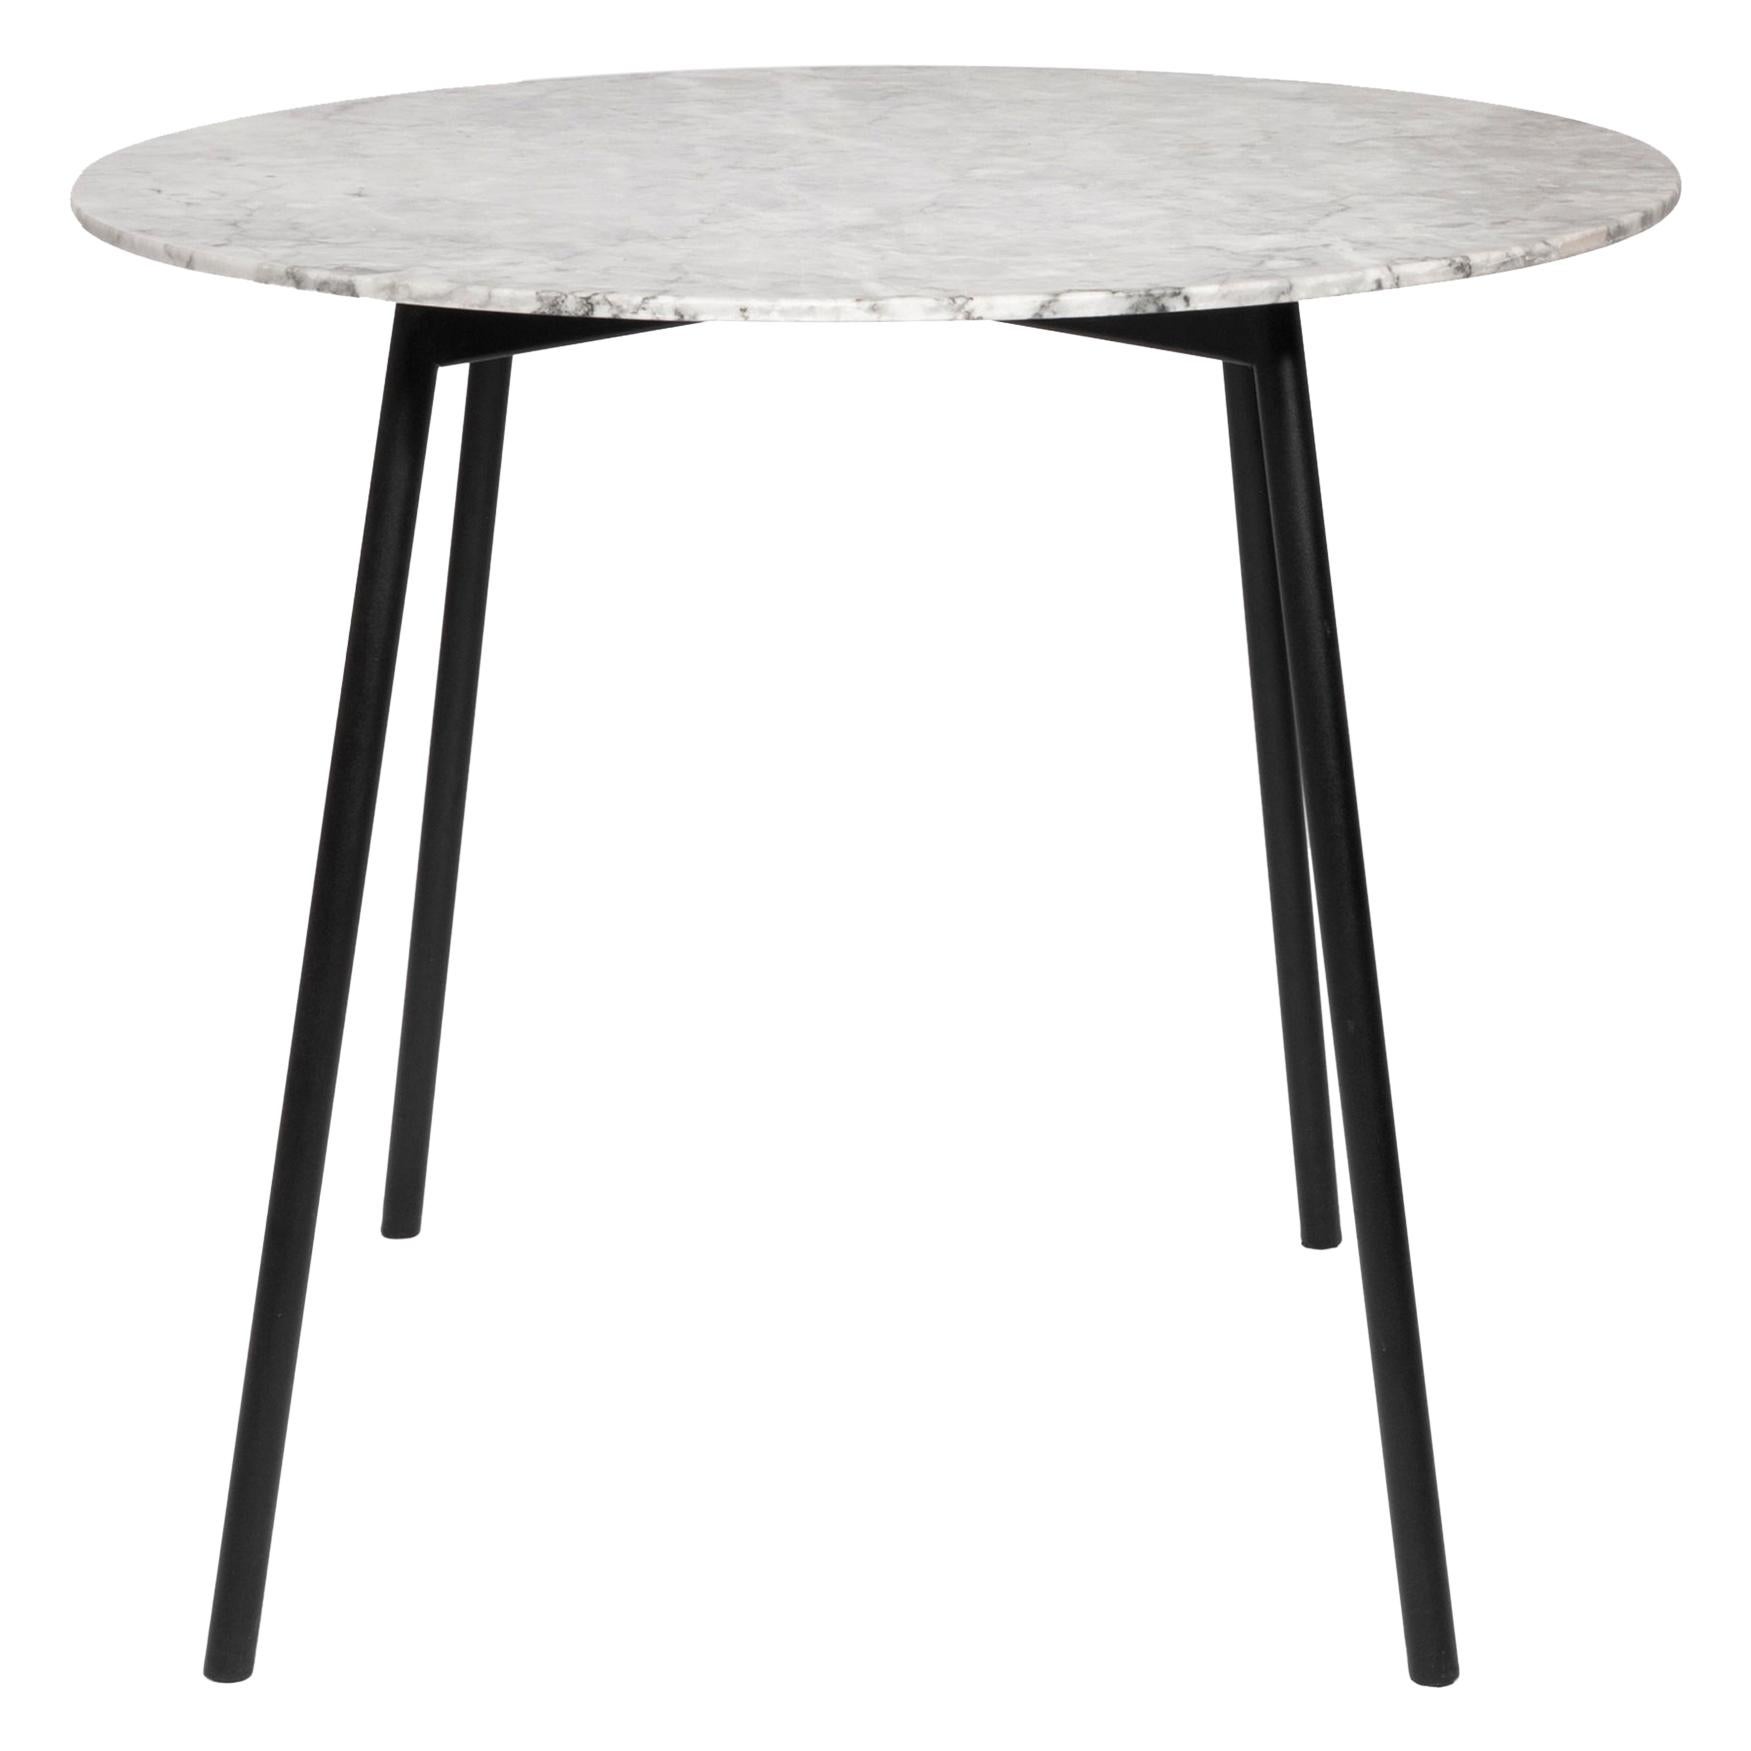 Moray Steel and White Marble Breakfast Table